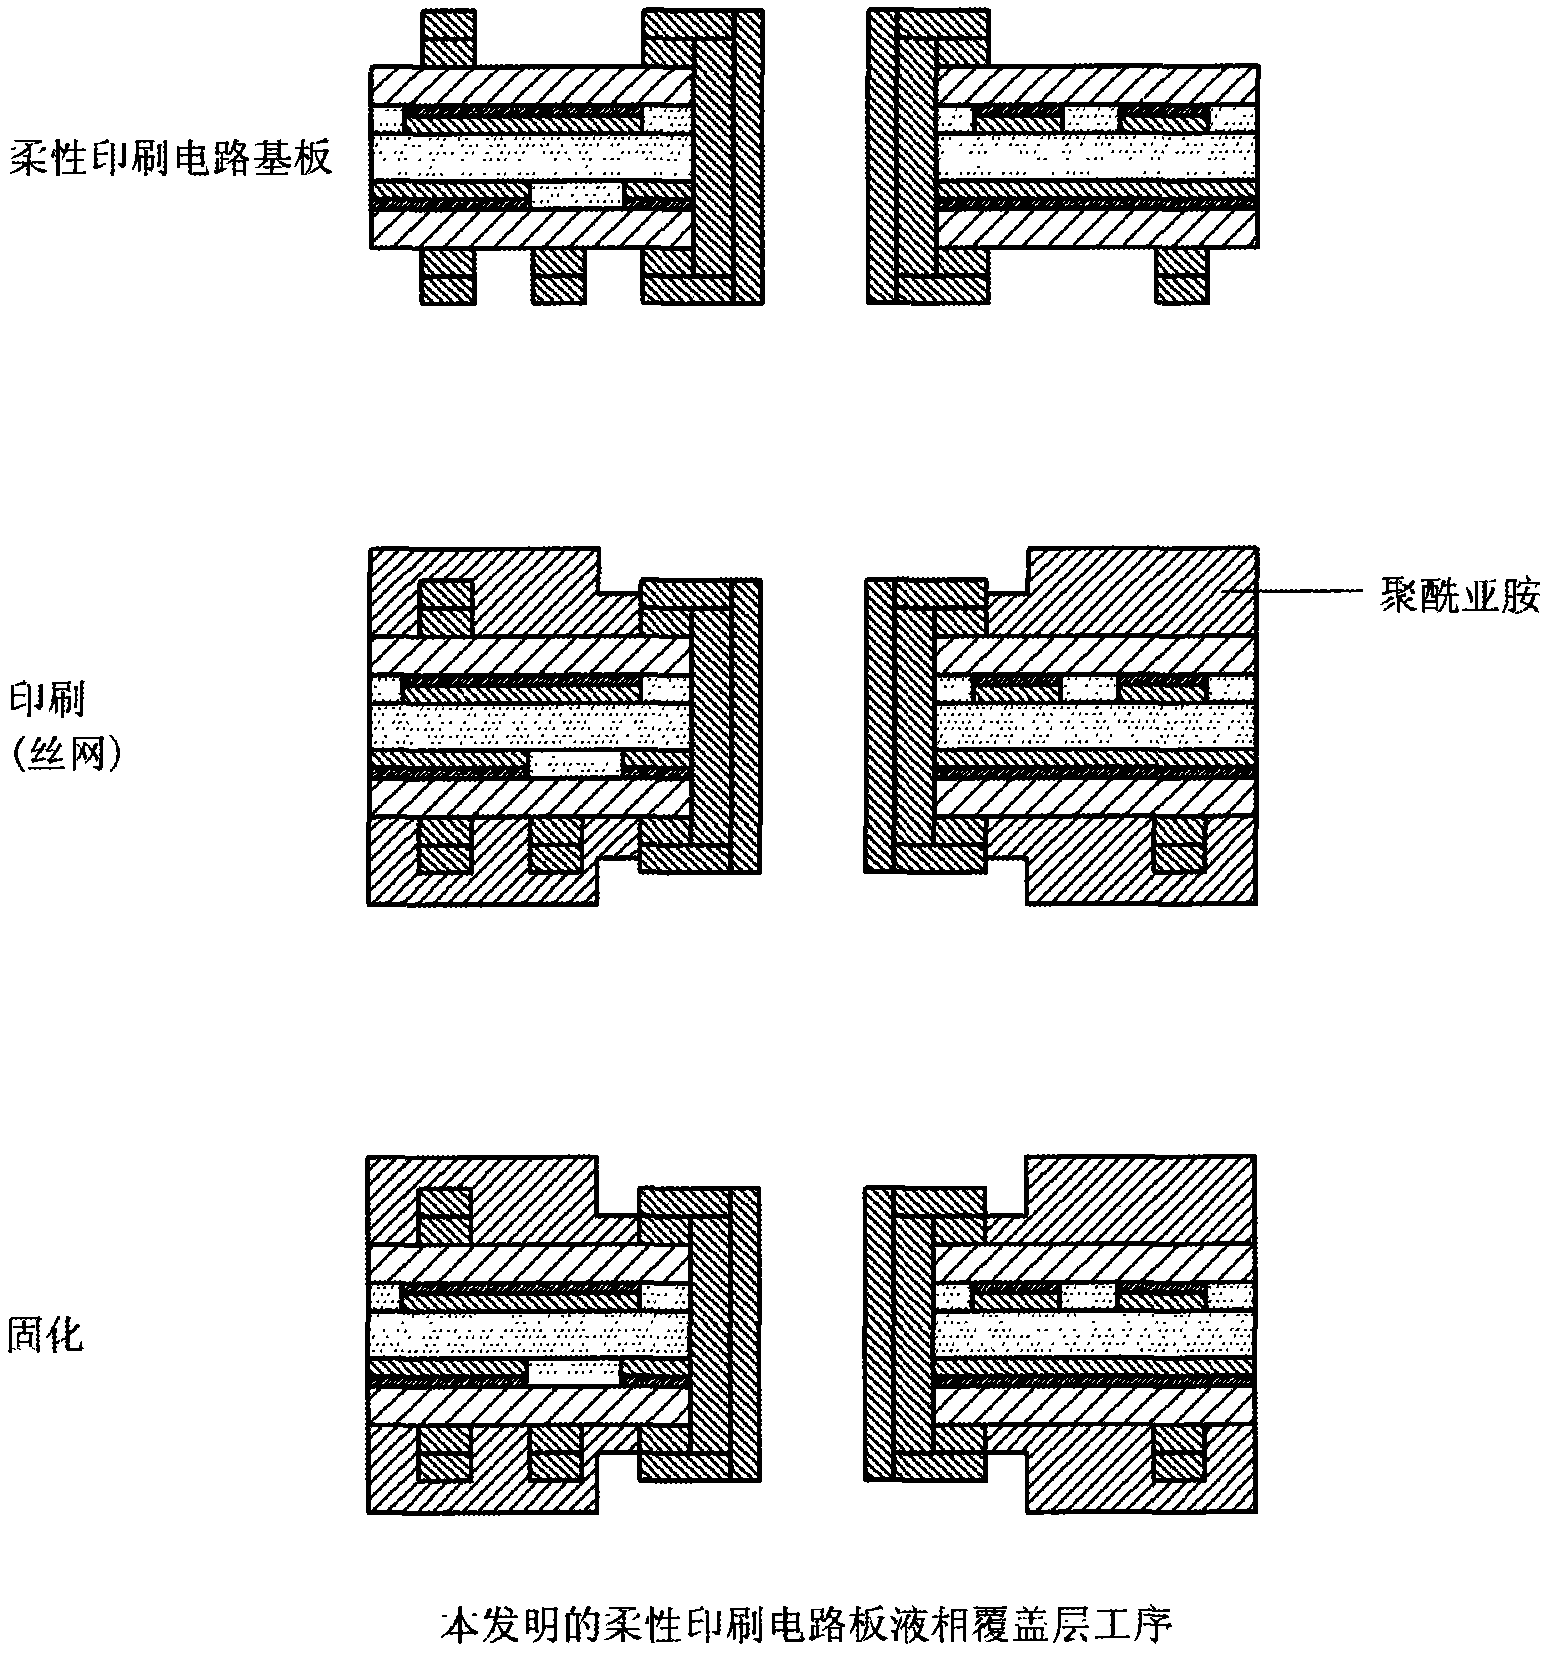 Composition for an FPCB coverlay and method for producing the same